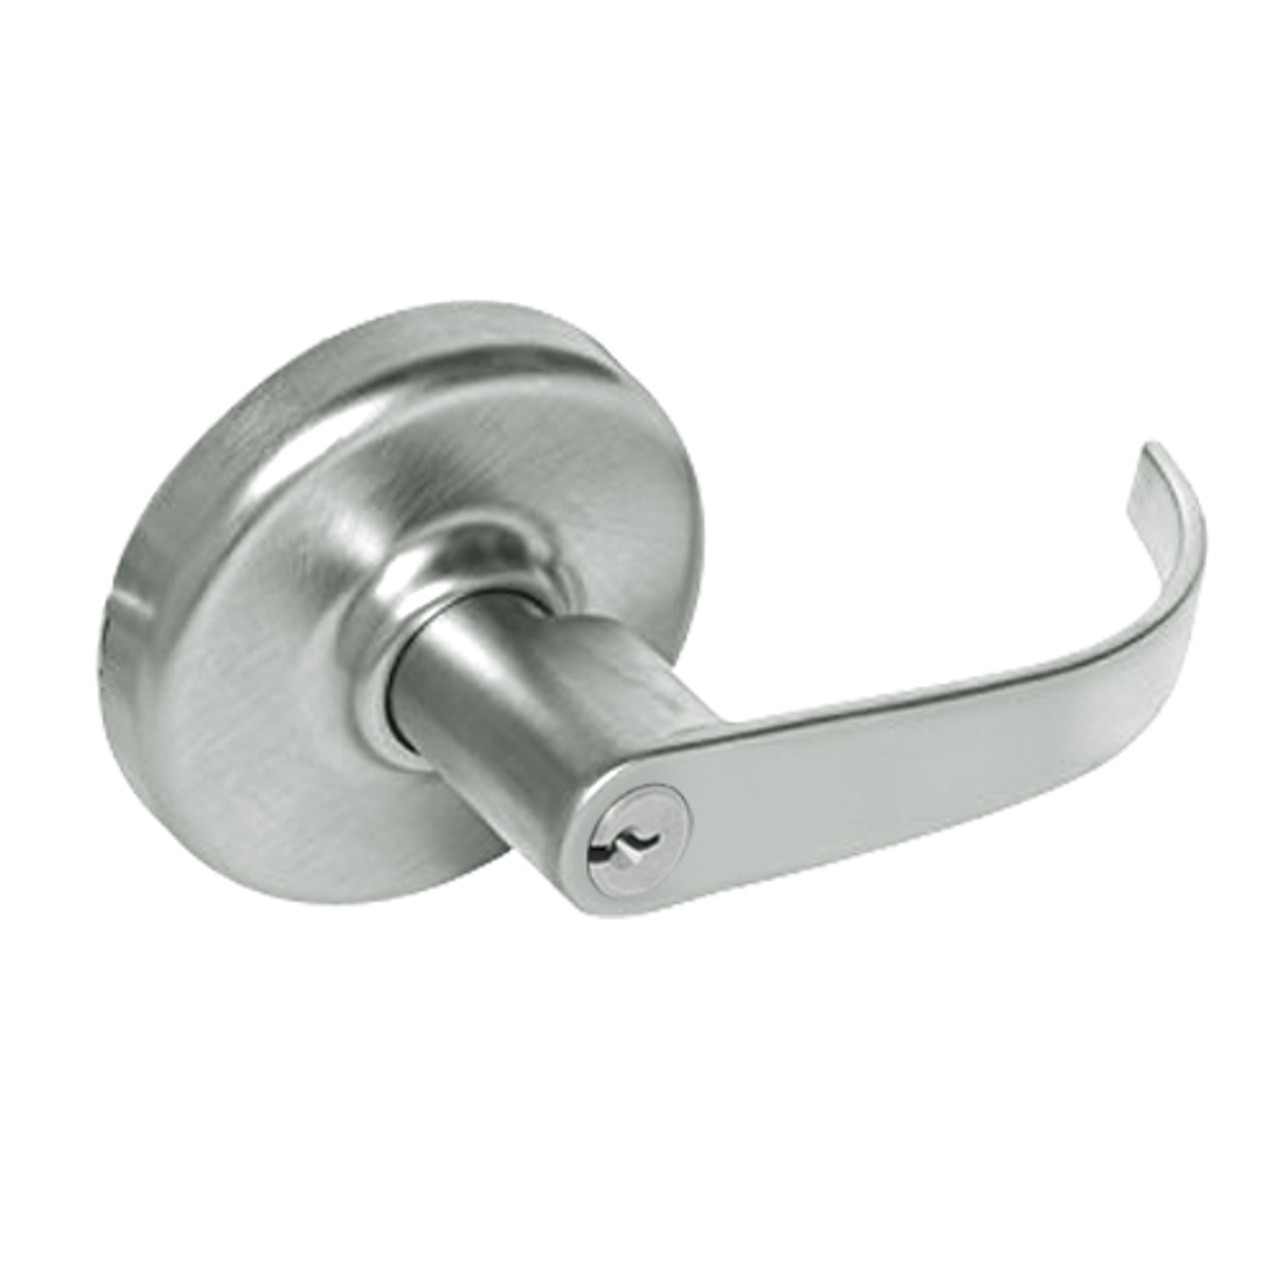 CL3375-PZD-618 Corbin CL3300 Series Extra Heavy Duty Corridor/Dormitory Cylindrical Locksets with Princeton Lever in Bright Nickel Plated Finish